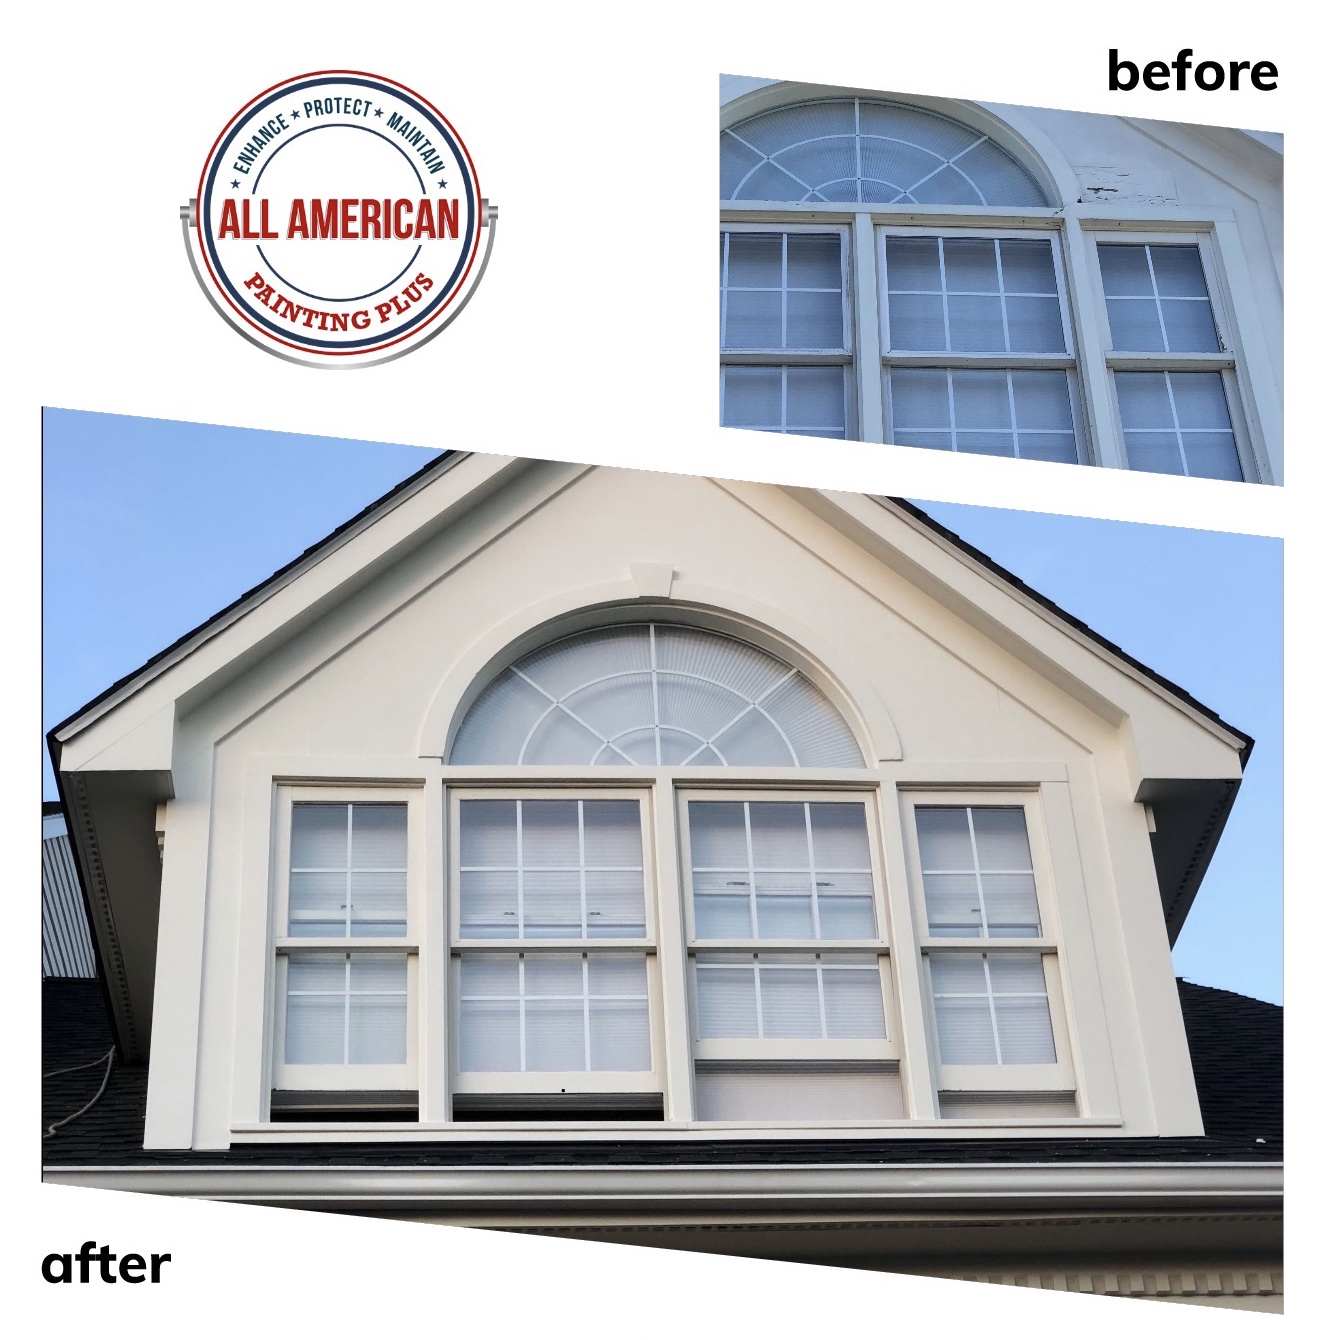 Exterior home repair before&after